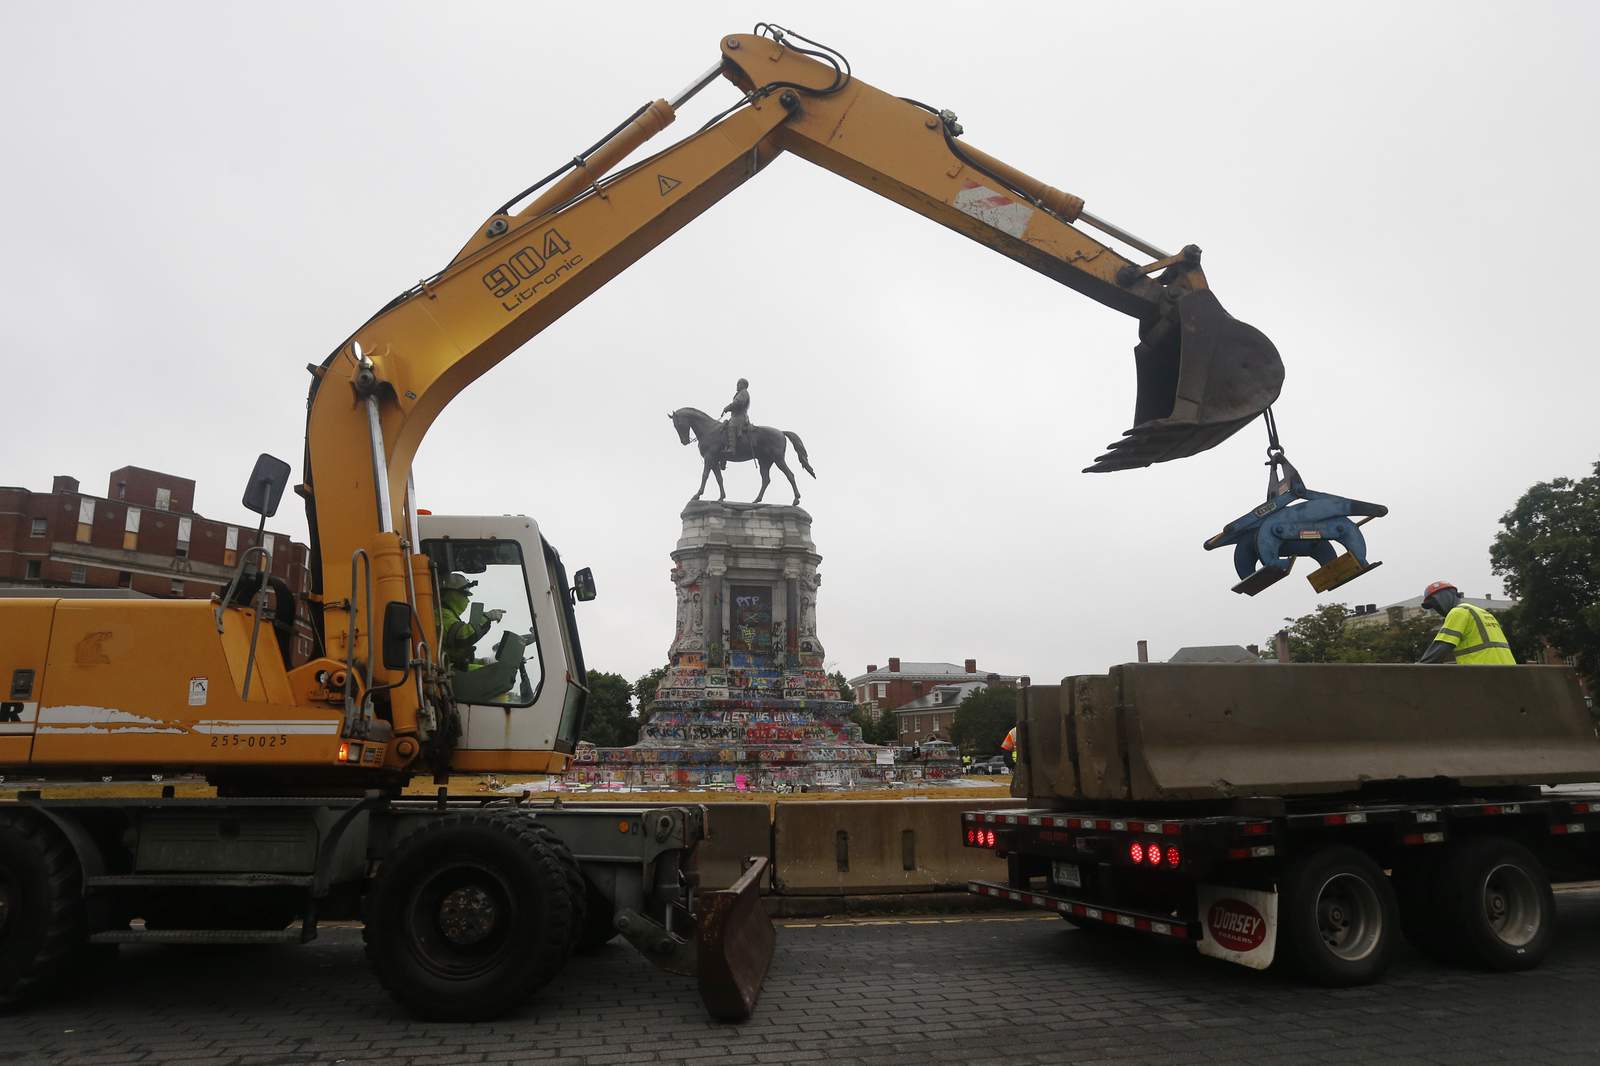 Lawsuit challenging removal of Lee statue in Richmond won’t move forward